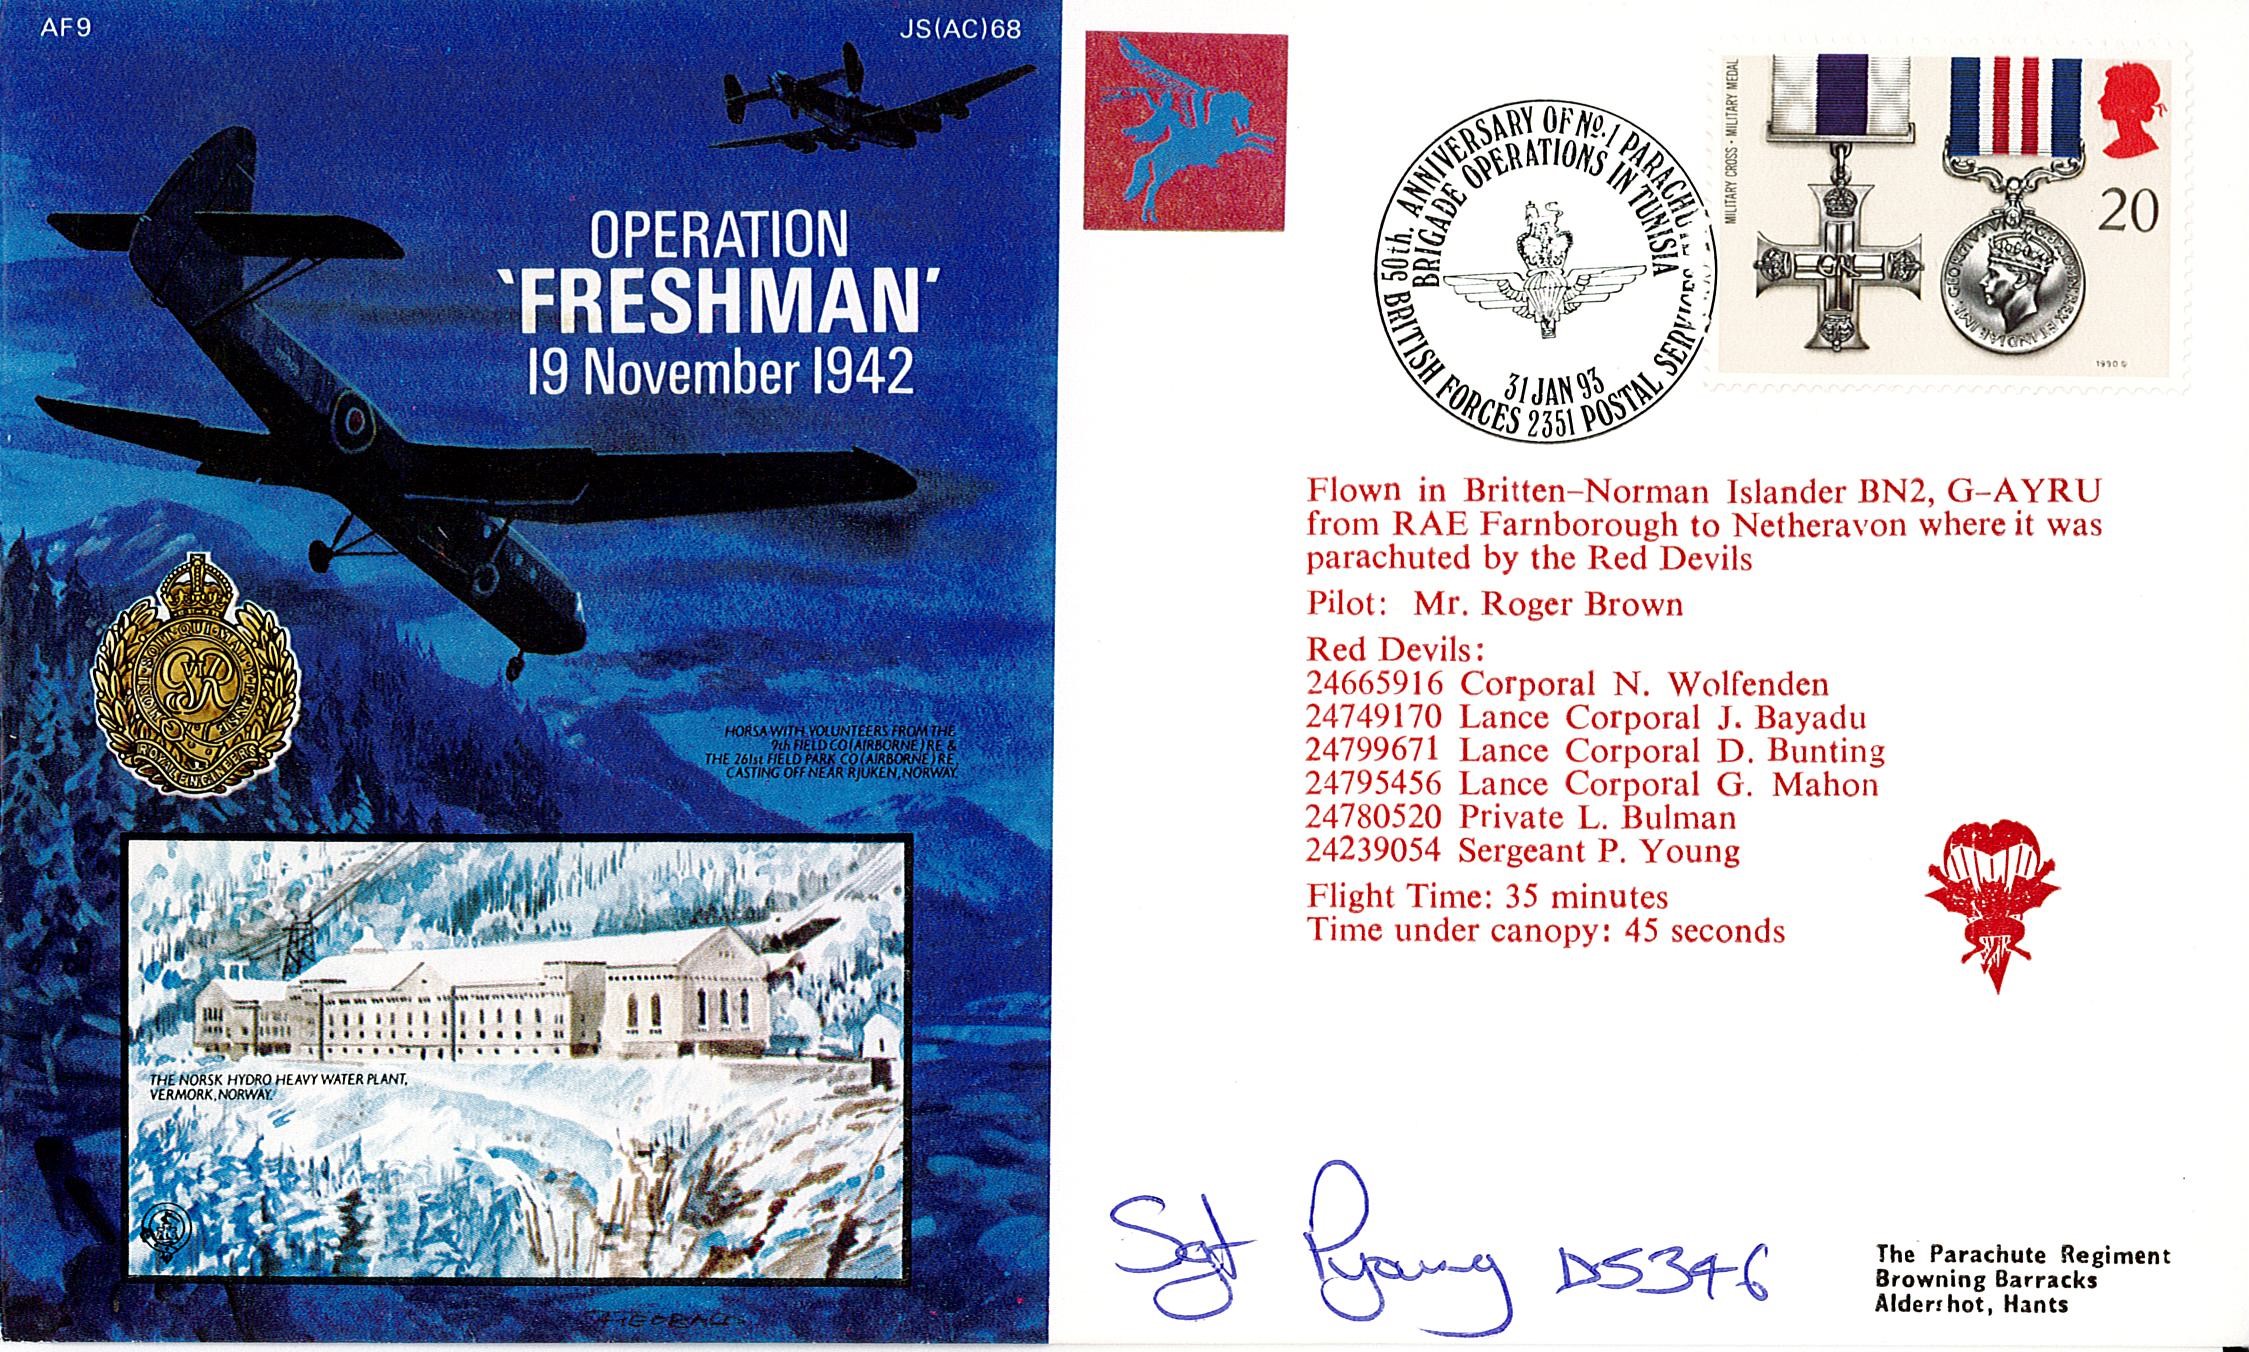 Sgt P Young Signed Operation Freshman 19 Nov 1942 FDC. British Stamp with 31 Jan 93 Postmark. Good